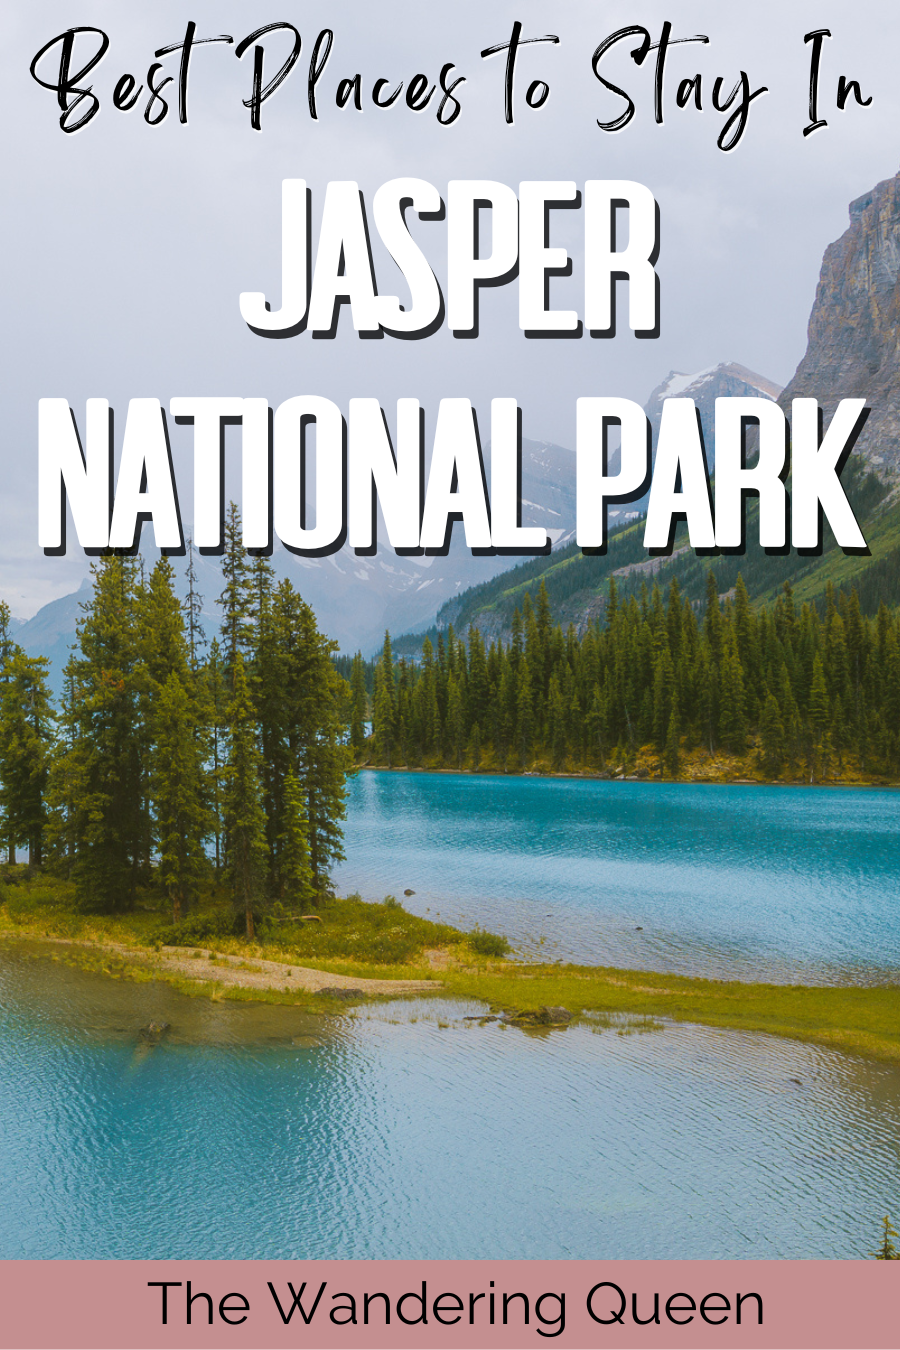 Where to Stay in Jasper National Park